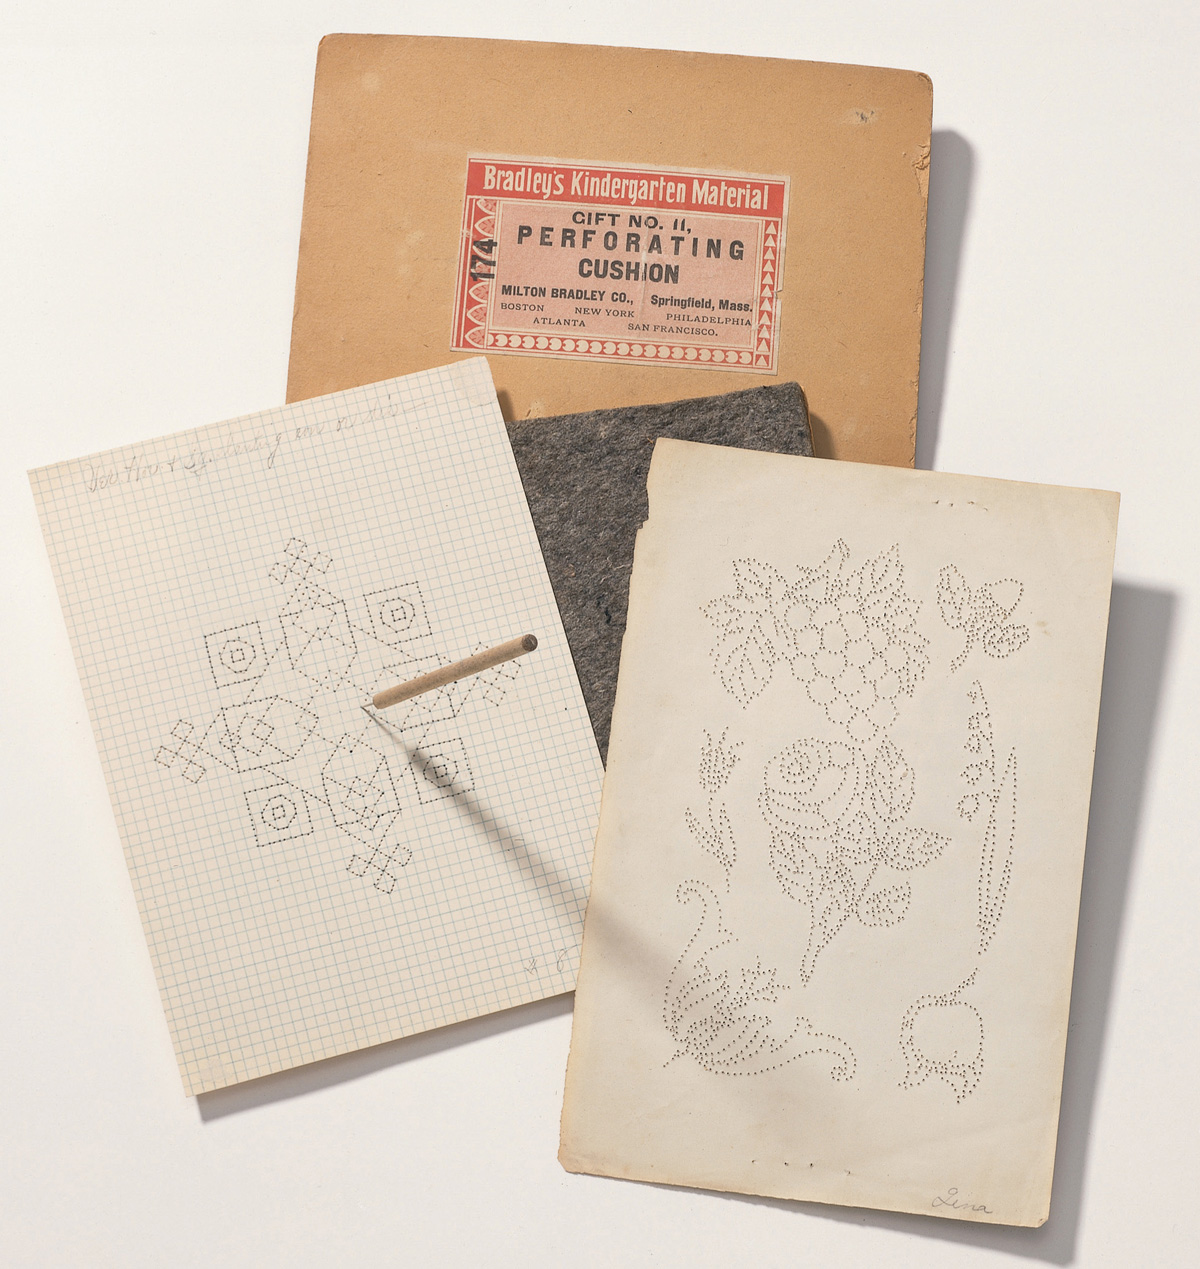 Clockwise from top: Perforating cushions, manufactured by Milton Bradley Company, ca. 1900; kindergartner Gina’s (last name unknown) nature forms made by pricking paper, United States, ca. 1900; another beauty form by Massachusetts teacher Abbie A. Herrick, 1875. Photograph Zindman/Freemont.